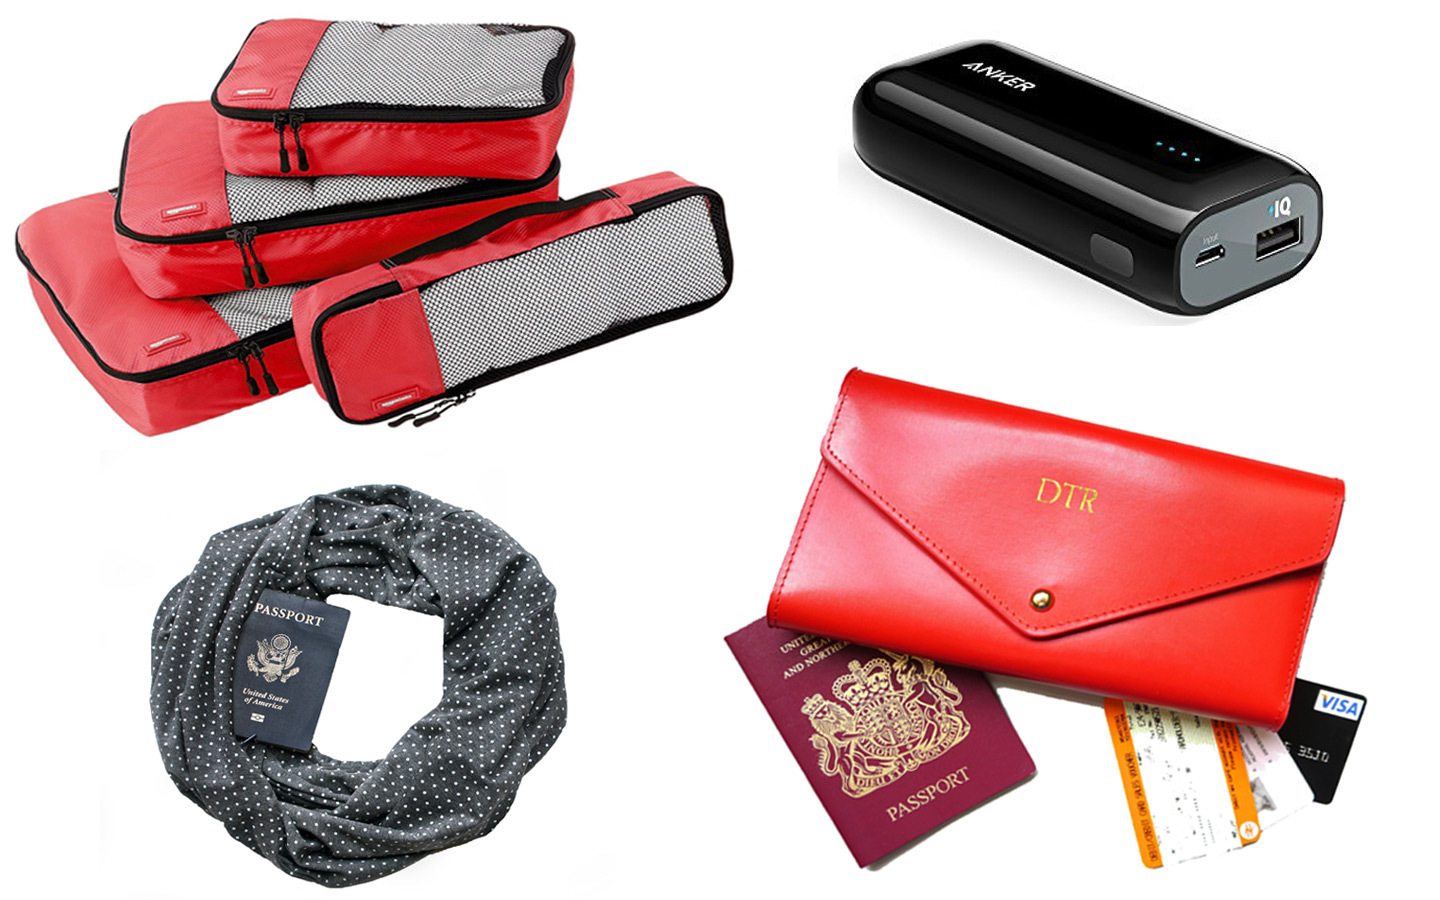 Travel kit gifts for travel lovers